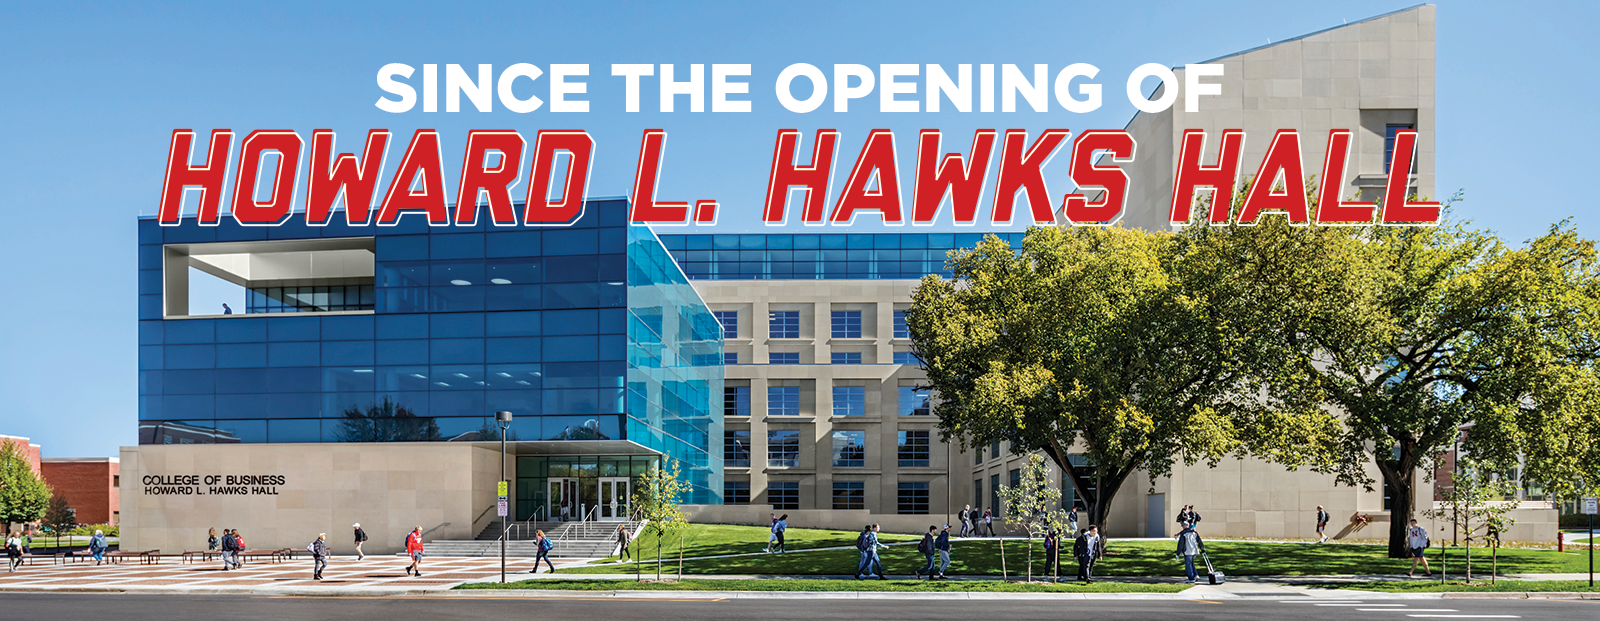 Since the opening of Howard L. Hawks Hall.